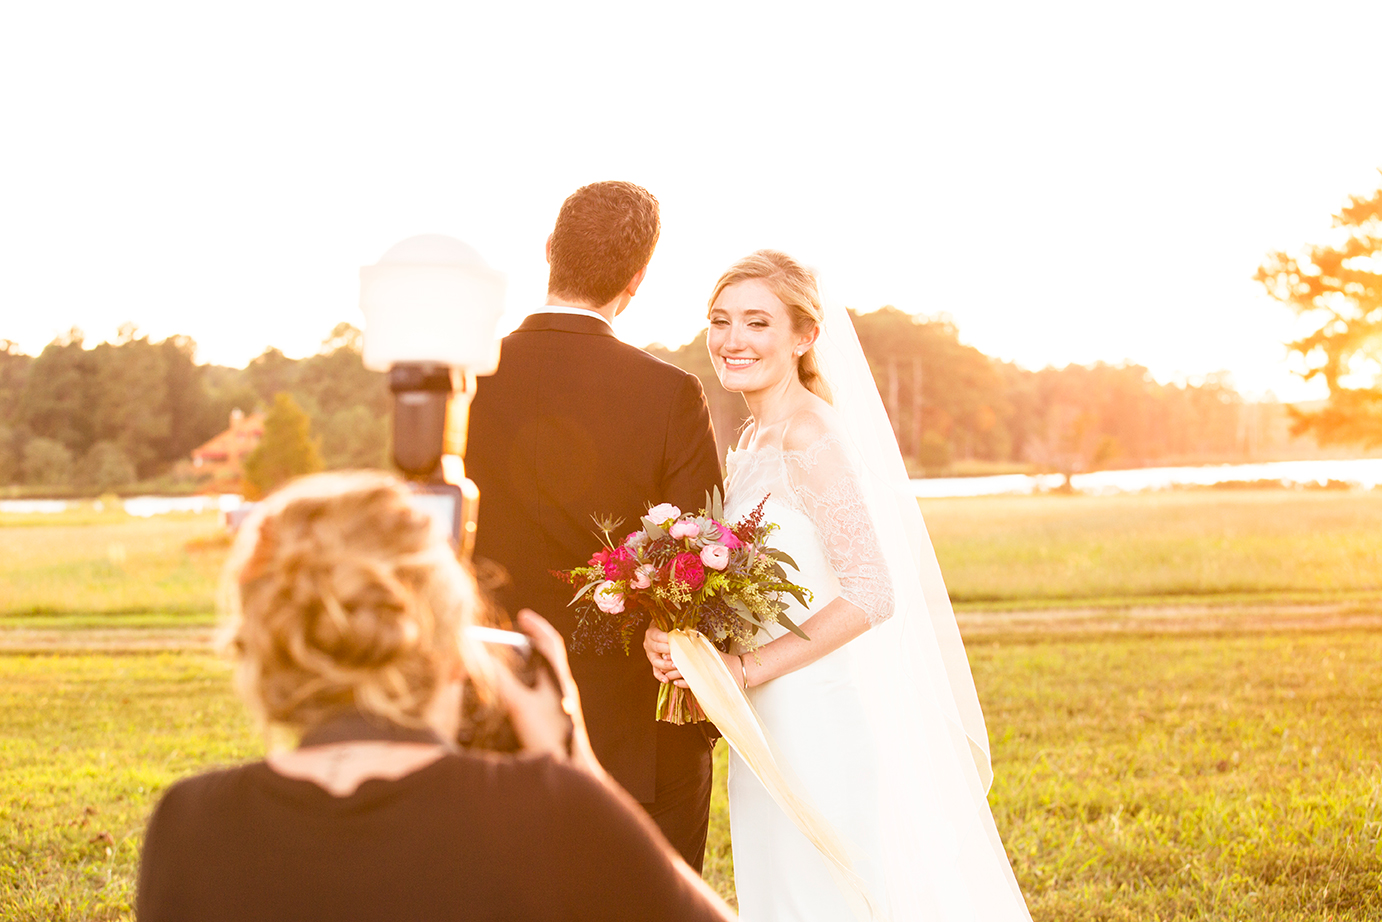 5 Ways Brides Can Make Their Wedding Photos Better - Image Property of www.j-dphoto.com